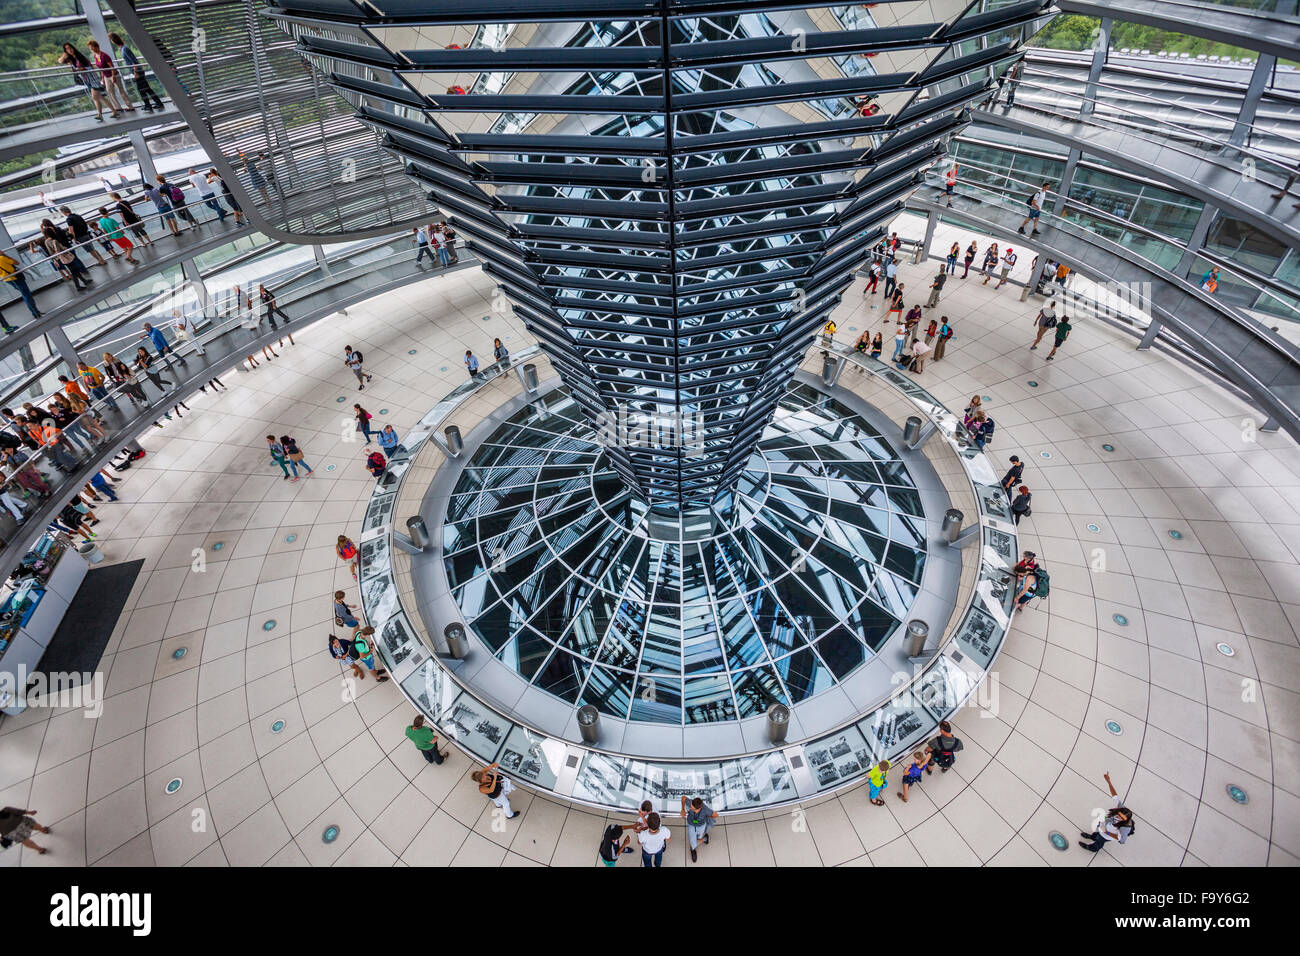 Germany, Berlin, Reichstag building, interior view of glas dome designed by Norman Foster with double-helix spiral ramps Stock Photo